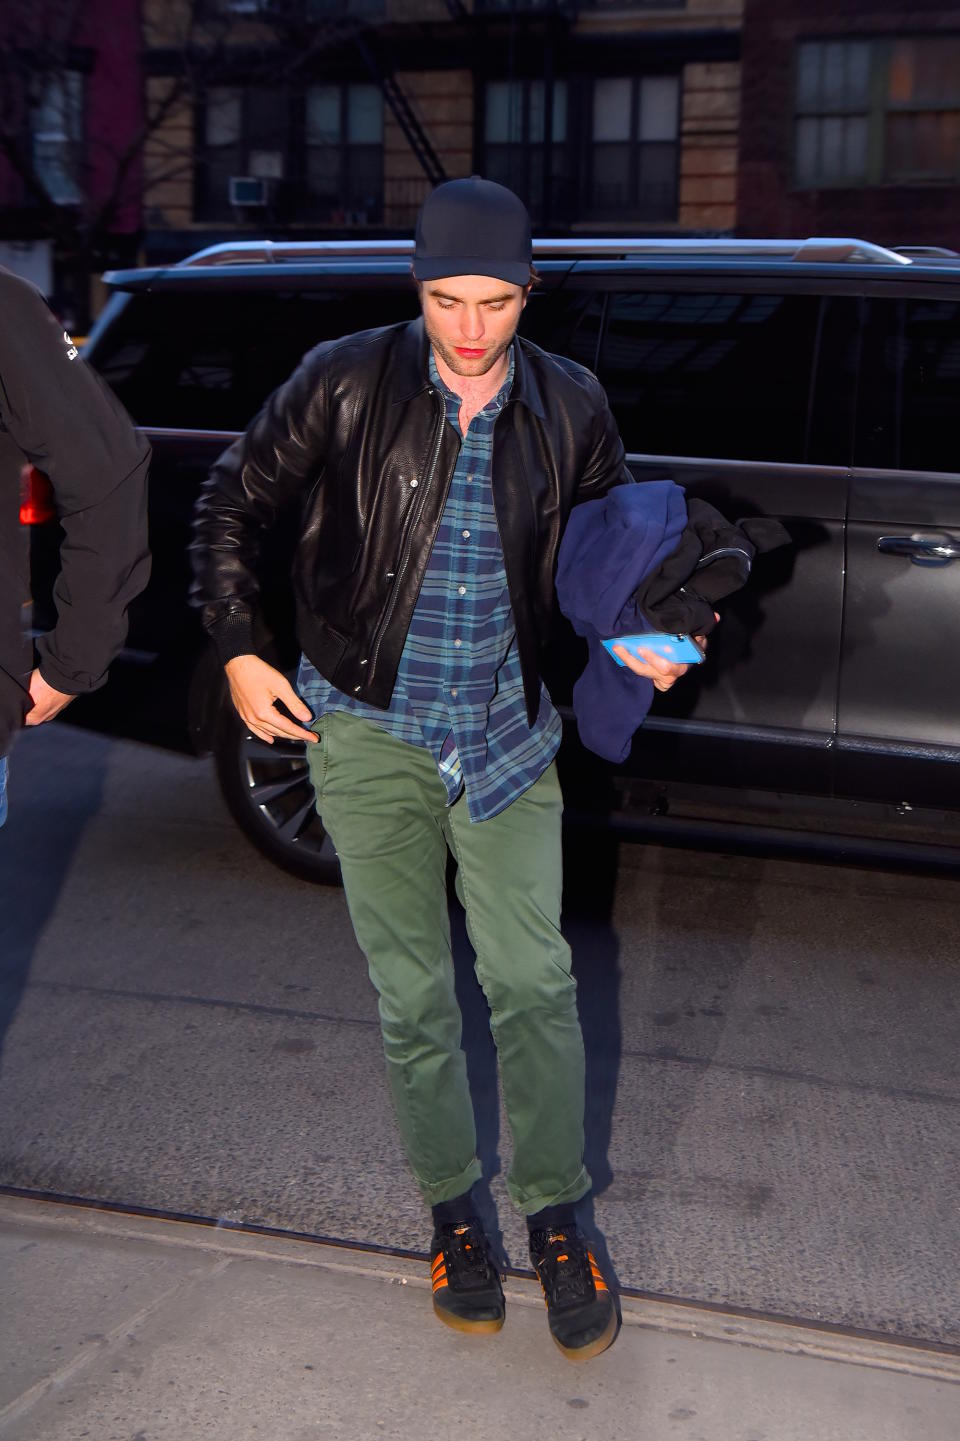 NEW YORK, NY - APRIL 04:  Robert Pattinson seen out and about in Manhattan on April 4, 2019 in New York City.  (Photo by Robert Kamau/GC Images)